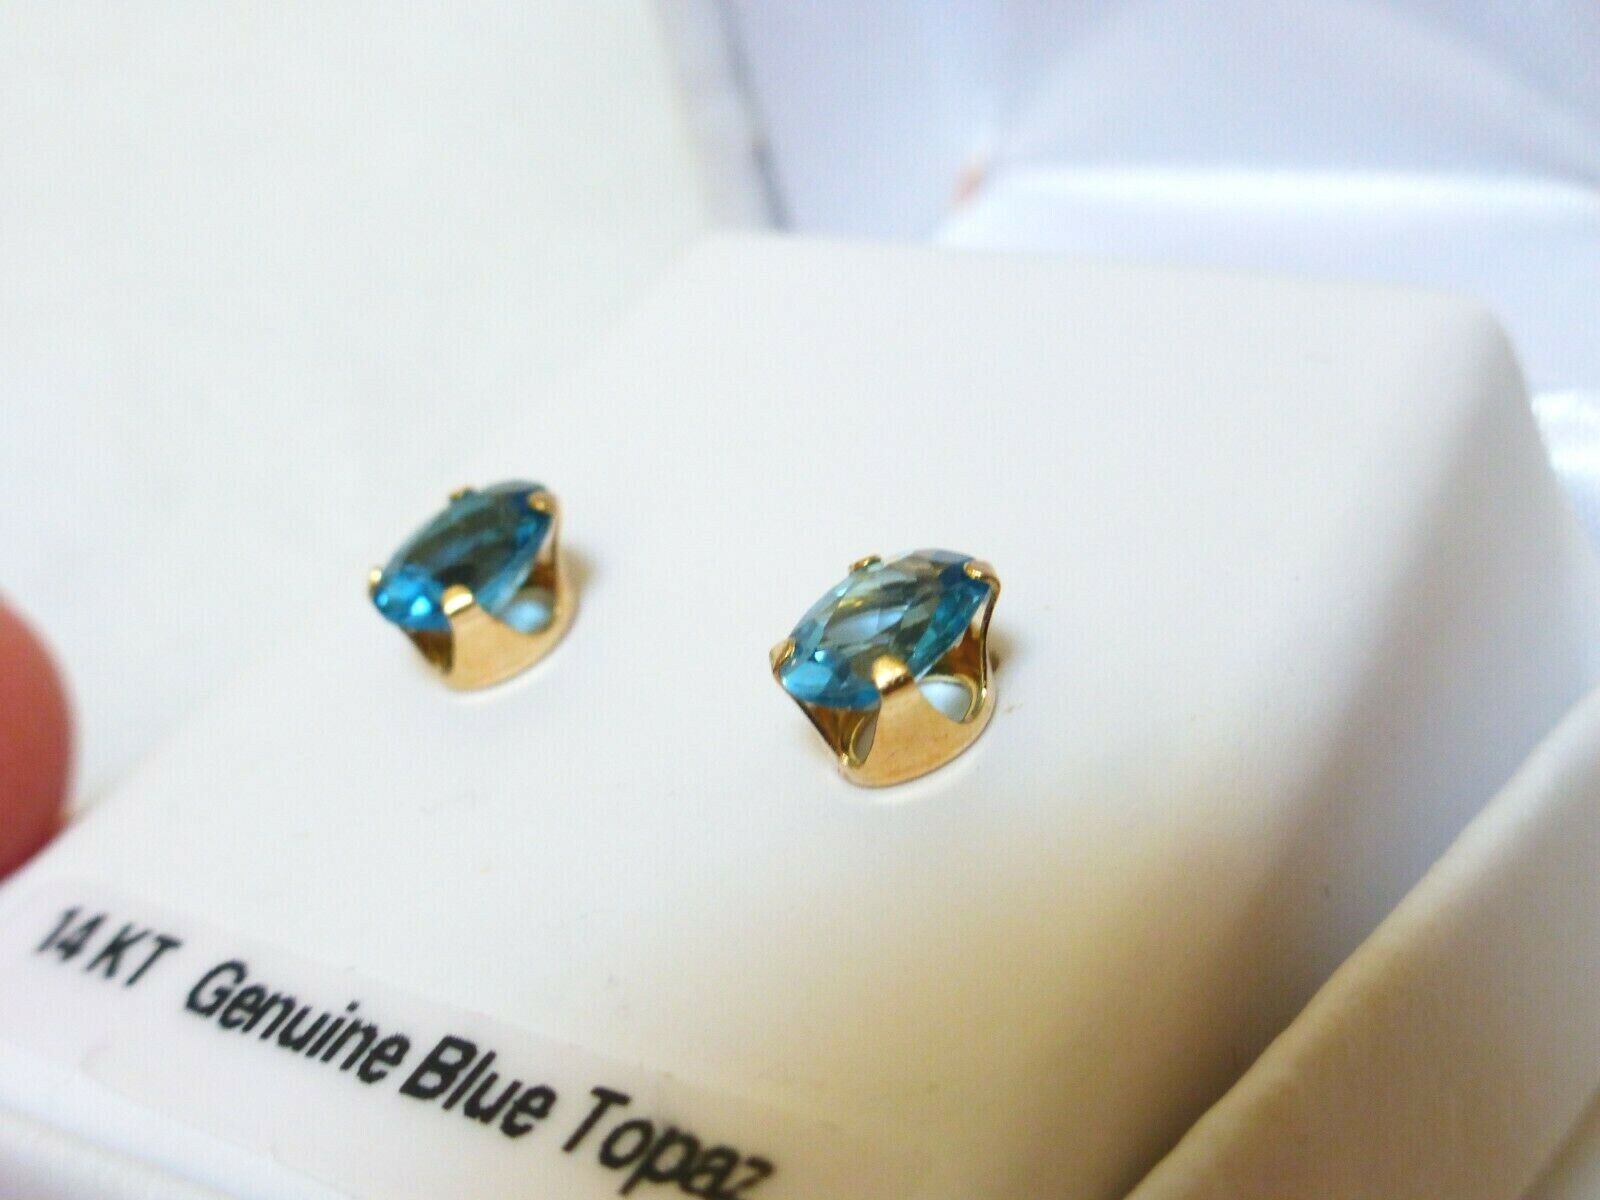 14K SOLID YELLOW GOLD GENUINE BLUE TOPAZ EARRINGS - image 7